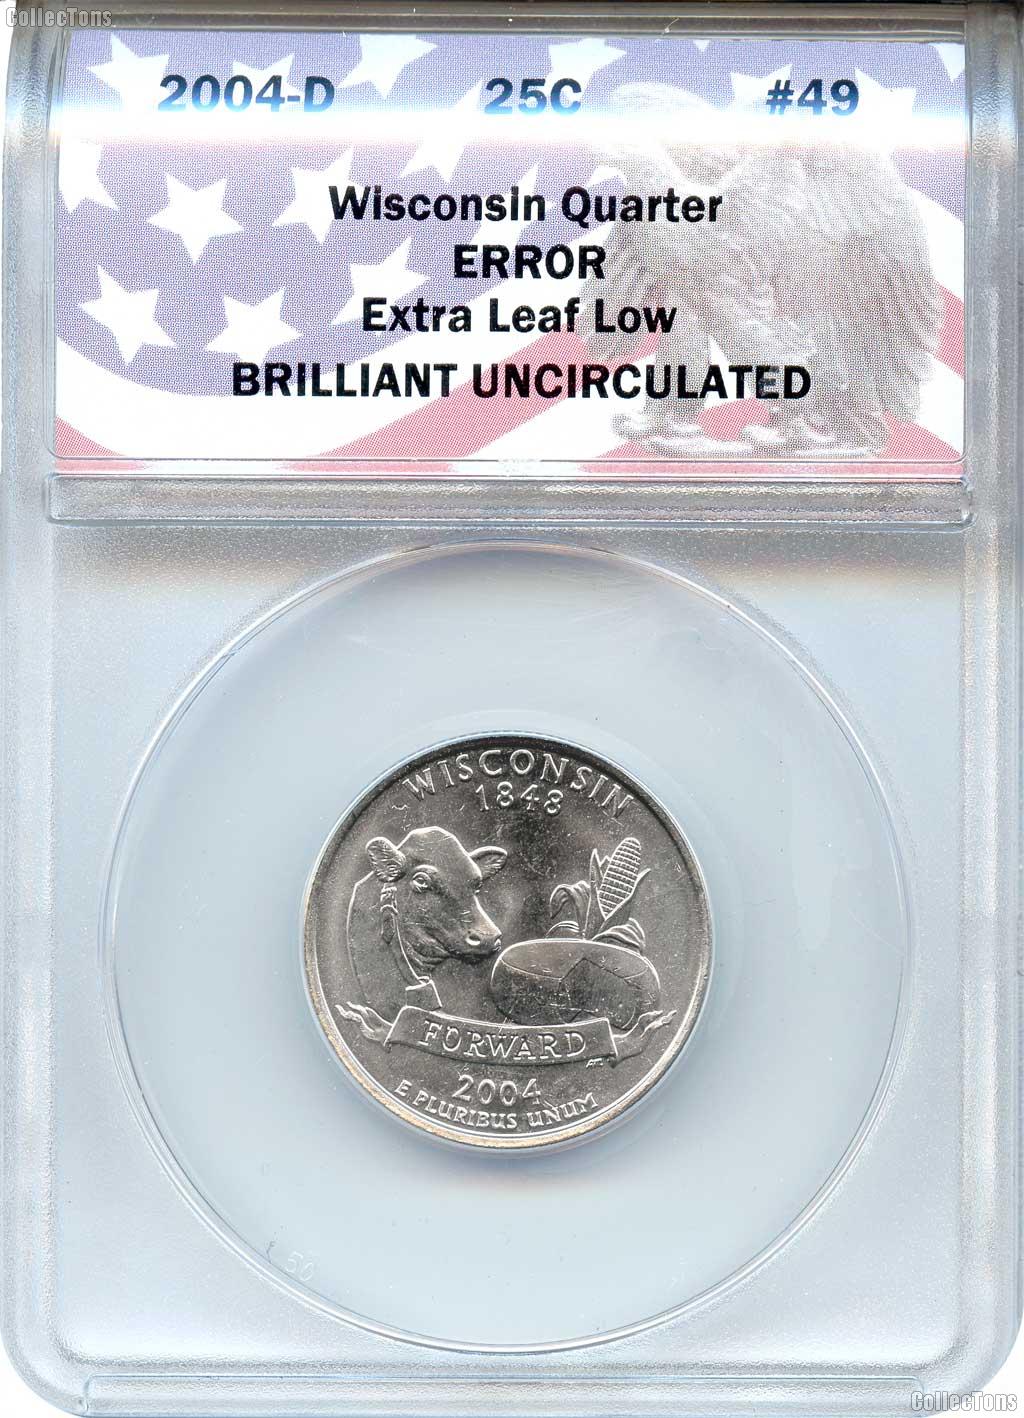 CollecTons Keepers #49: 2004-D Wisconsin Quarter, Extra Leaf Low, Error Coin